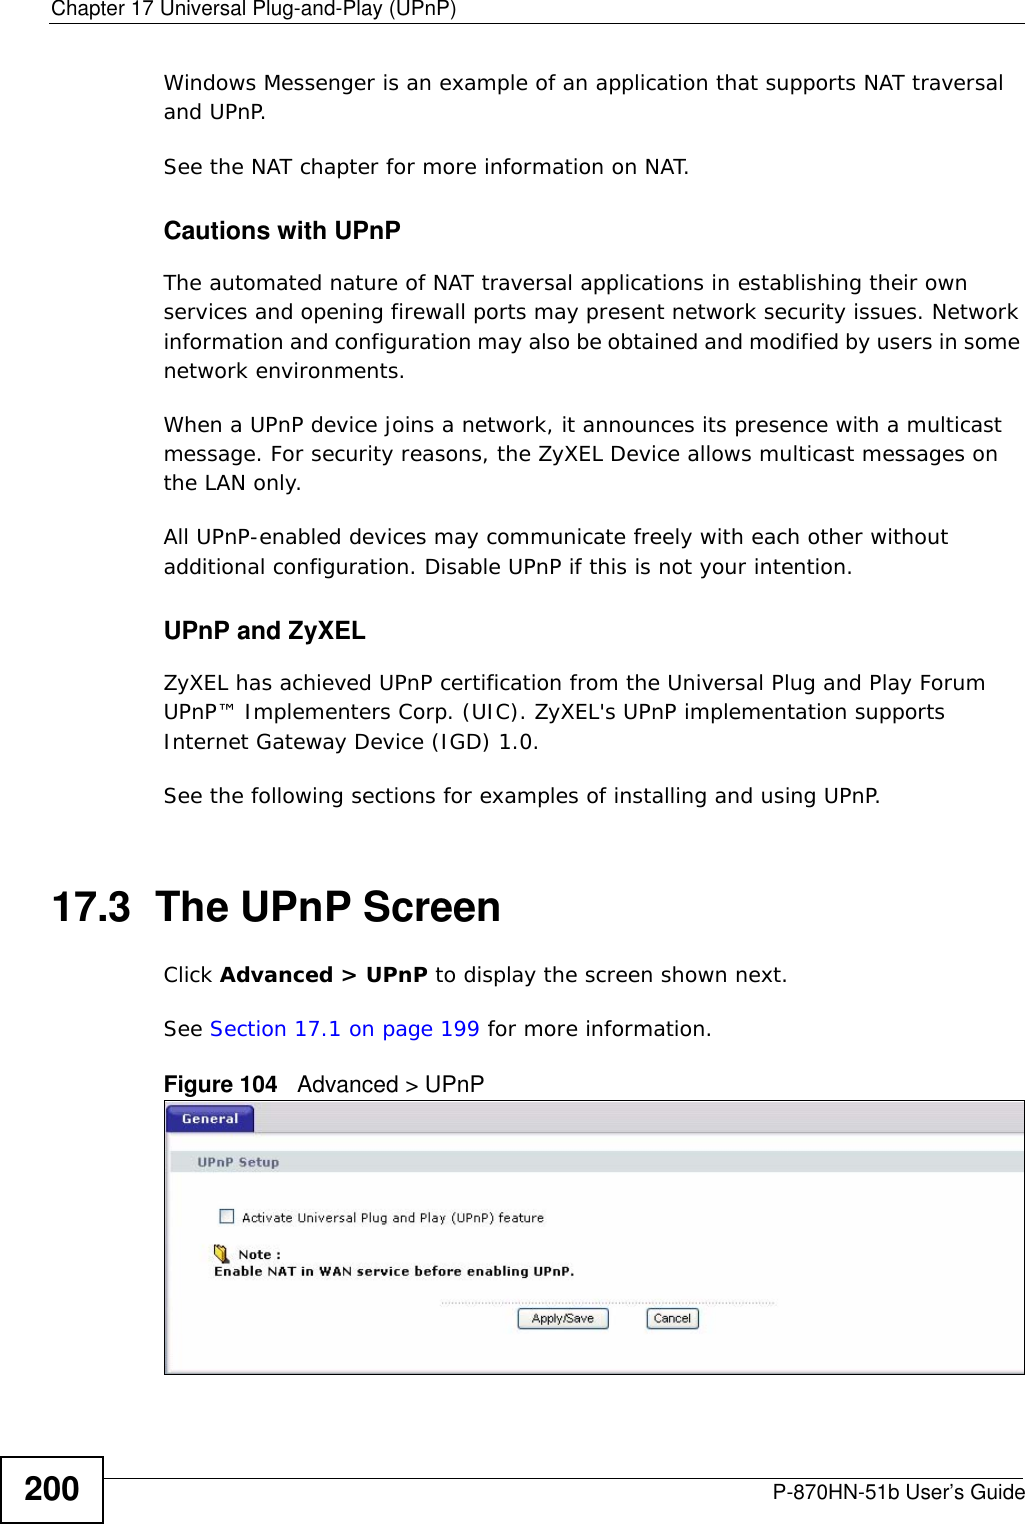 Chapter 17 Universal Plug-and-Play (UPnP)P-870HN-51b User’s Guide200Windows Messenger is an example of an application that supports NAT traversal and UPnP. See the NAT chapter for more information on NAT.Cautions with UPnPThe automated nature of NAT traversal applications in establishing their own services and opening firewall ports may present network security issues. Network information and configuration may also be obtained and modified by users in some network environments. When a UPnP device joins a network, it announces its presence with a multicast message. For security reasons, the ZyXEL Device allows multicast messages on the LAN only.All UPnP-enabled devices may communicate freely with each other without additional configuration. Disable UPnP if this is not your intention. UPnP and ZyXELZyXEL has achieved UPnP certification from the Universal Plug and Play Forum UPnP™ Implementers Corp. (UIC). ZyXEL&apos;s UPnP implementation supports Internet Gateway Device (IGD) 1.0. See the following sections for examples of installing and using UPnP.17.3  The UPnP ScreenClick Advanced &gt; UPnP to display the screen shown next.See Section 17.1 on page 199 for more information. Figure 104   Advanced &gt; UPnP 